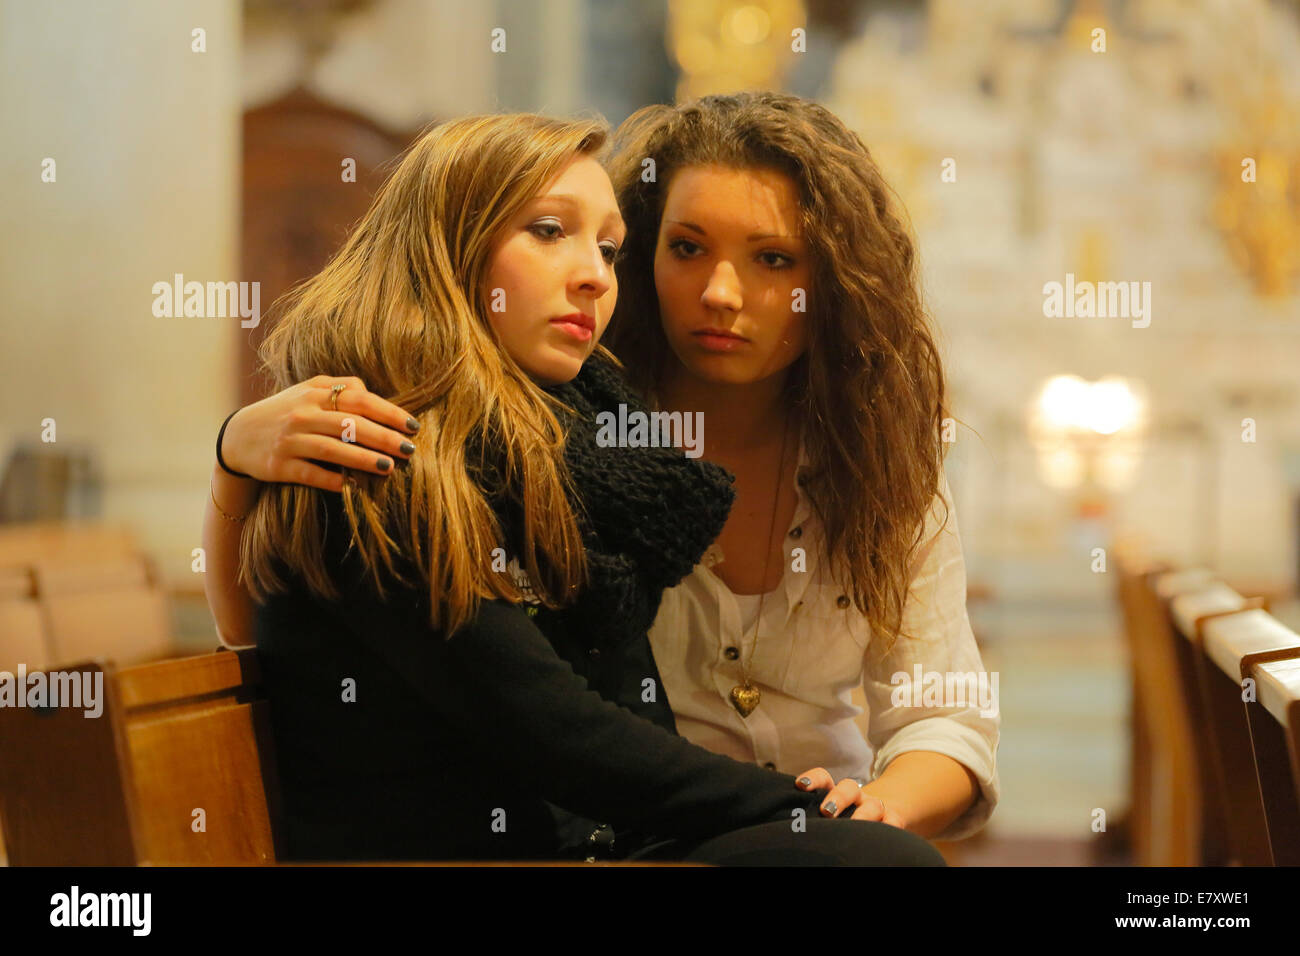 Two girlfriends, teenagers, sitting in a church, one embracing the other, Menton, Alpes-Maritimes, Provence-Alpes-Côte d'Azur Stock Photo